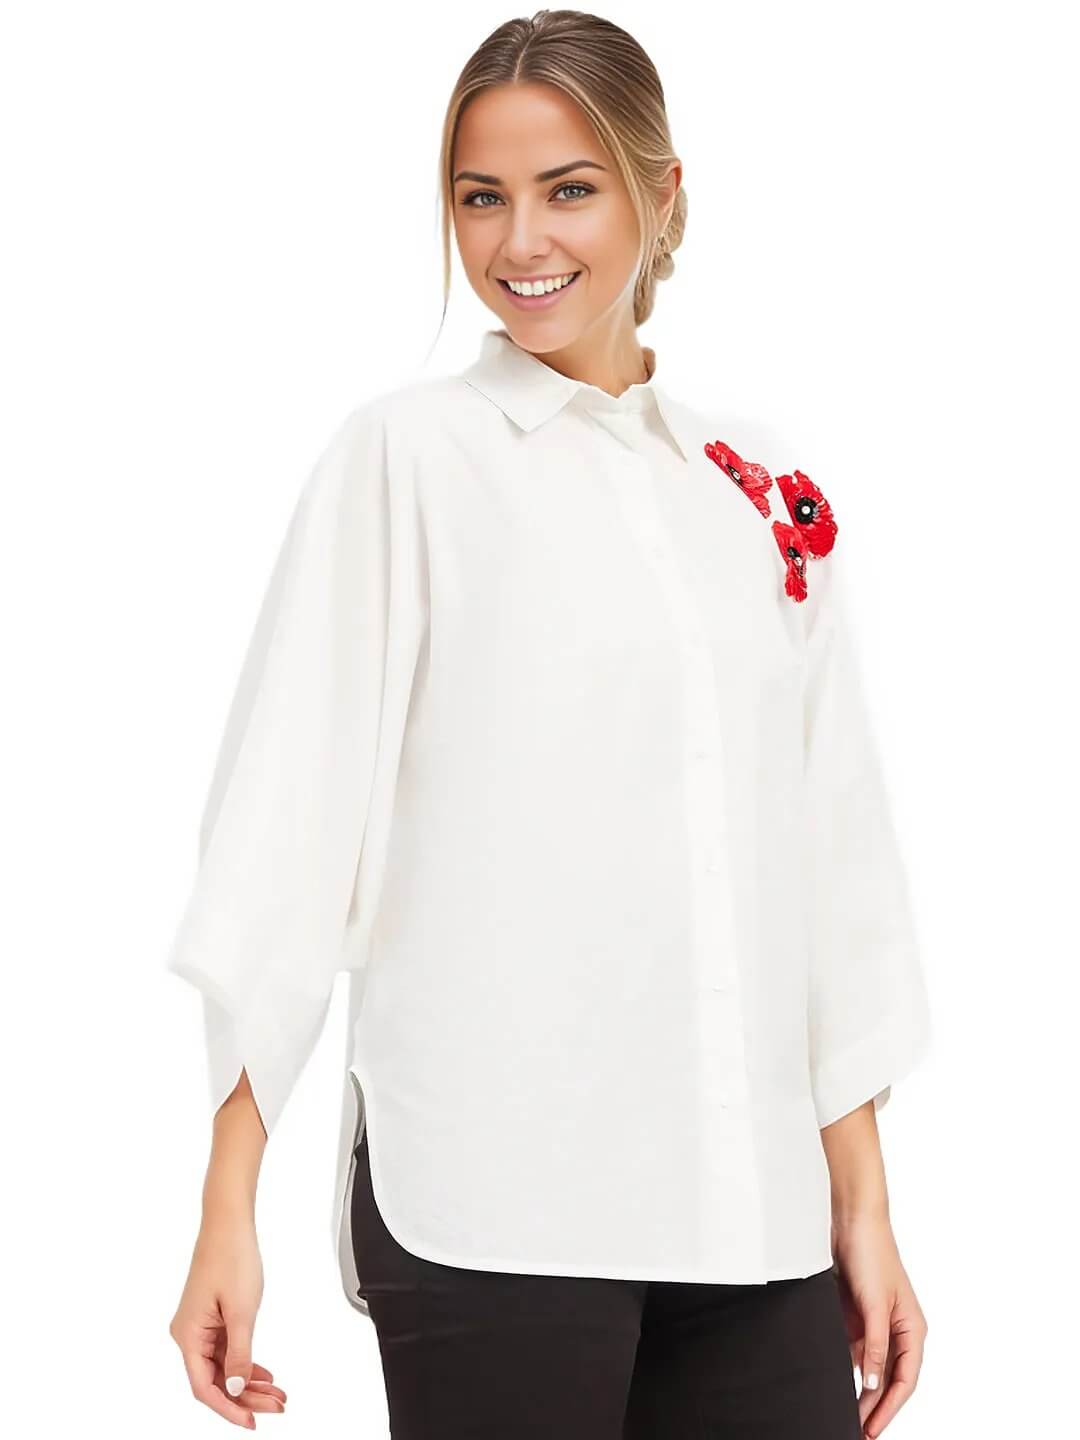 White Cotton Shirt With Embroidery Patch